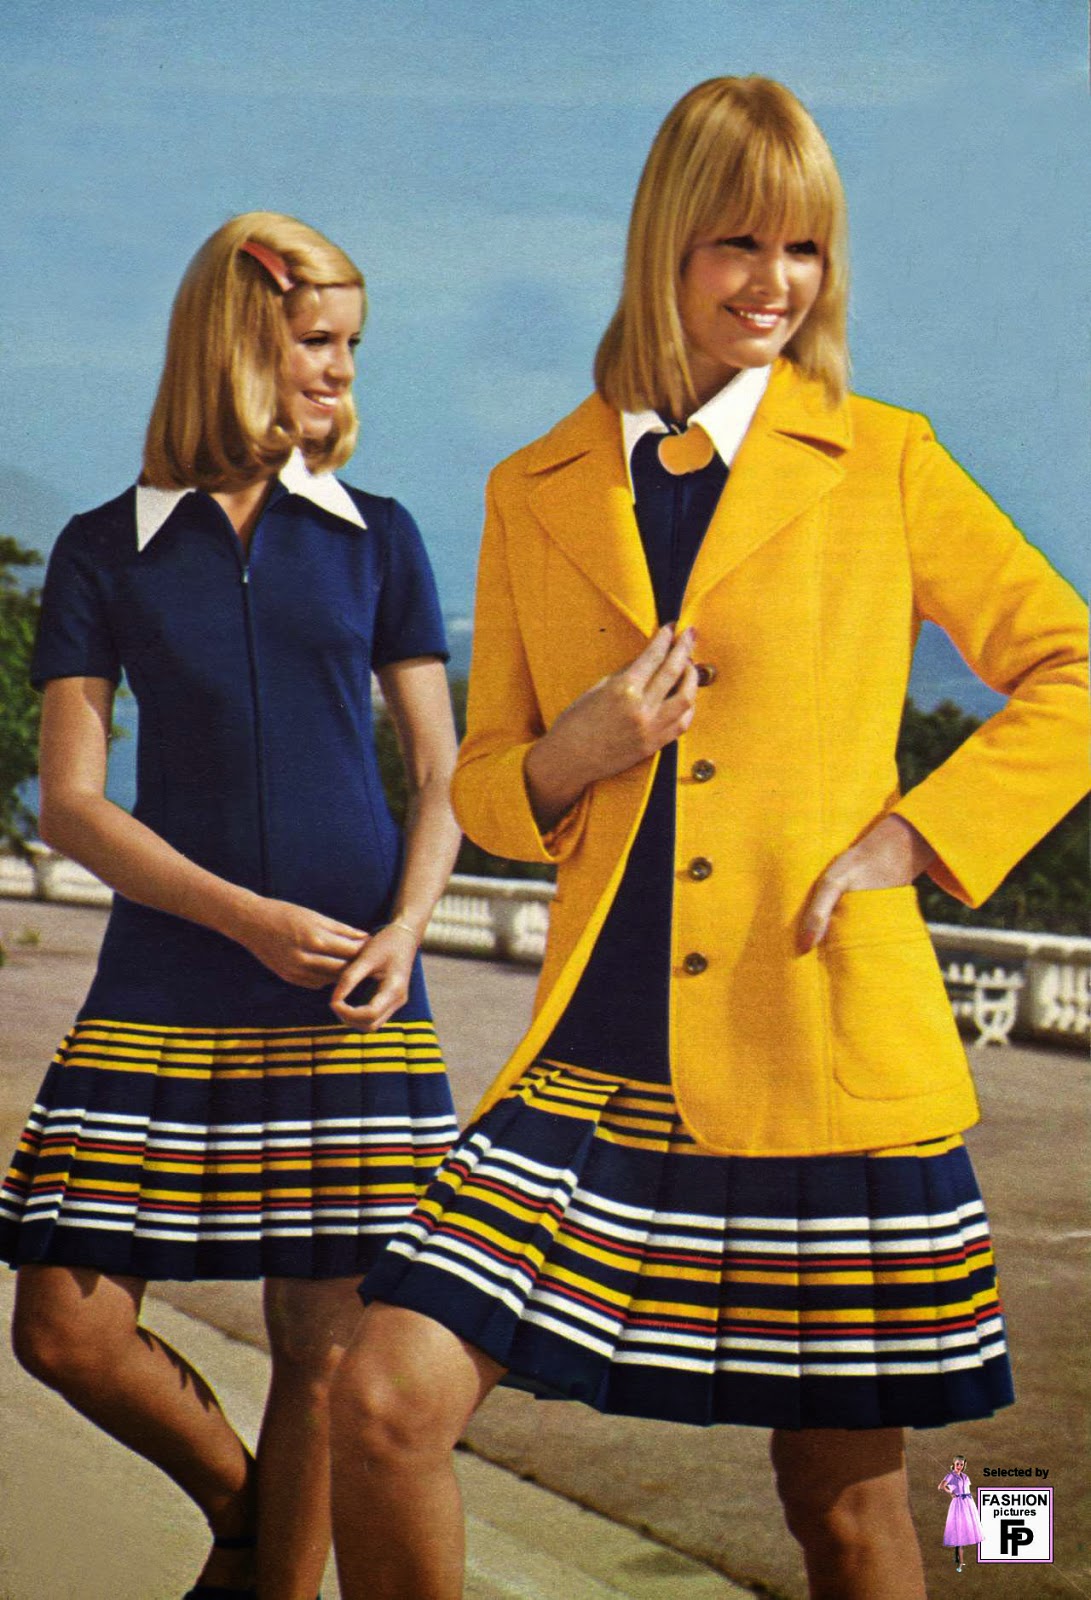 Colorful Women's Street Fashions in the Early 1970s ~ vintage everyday